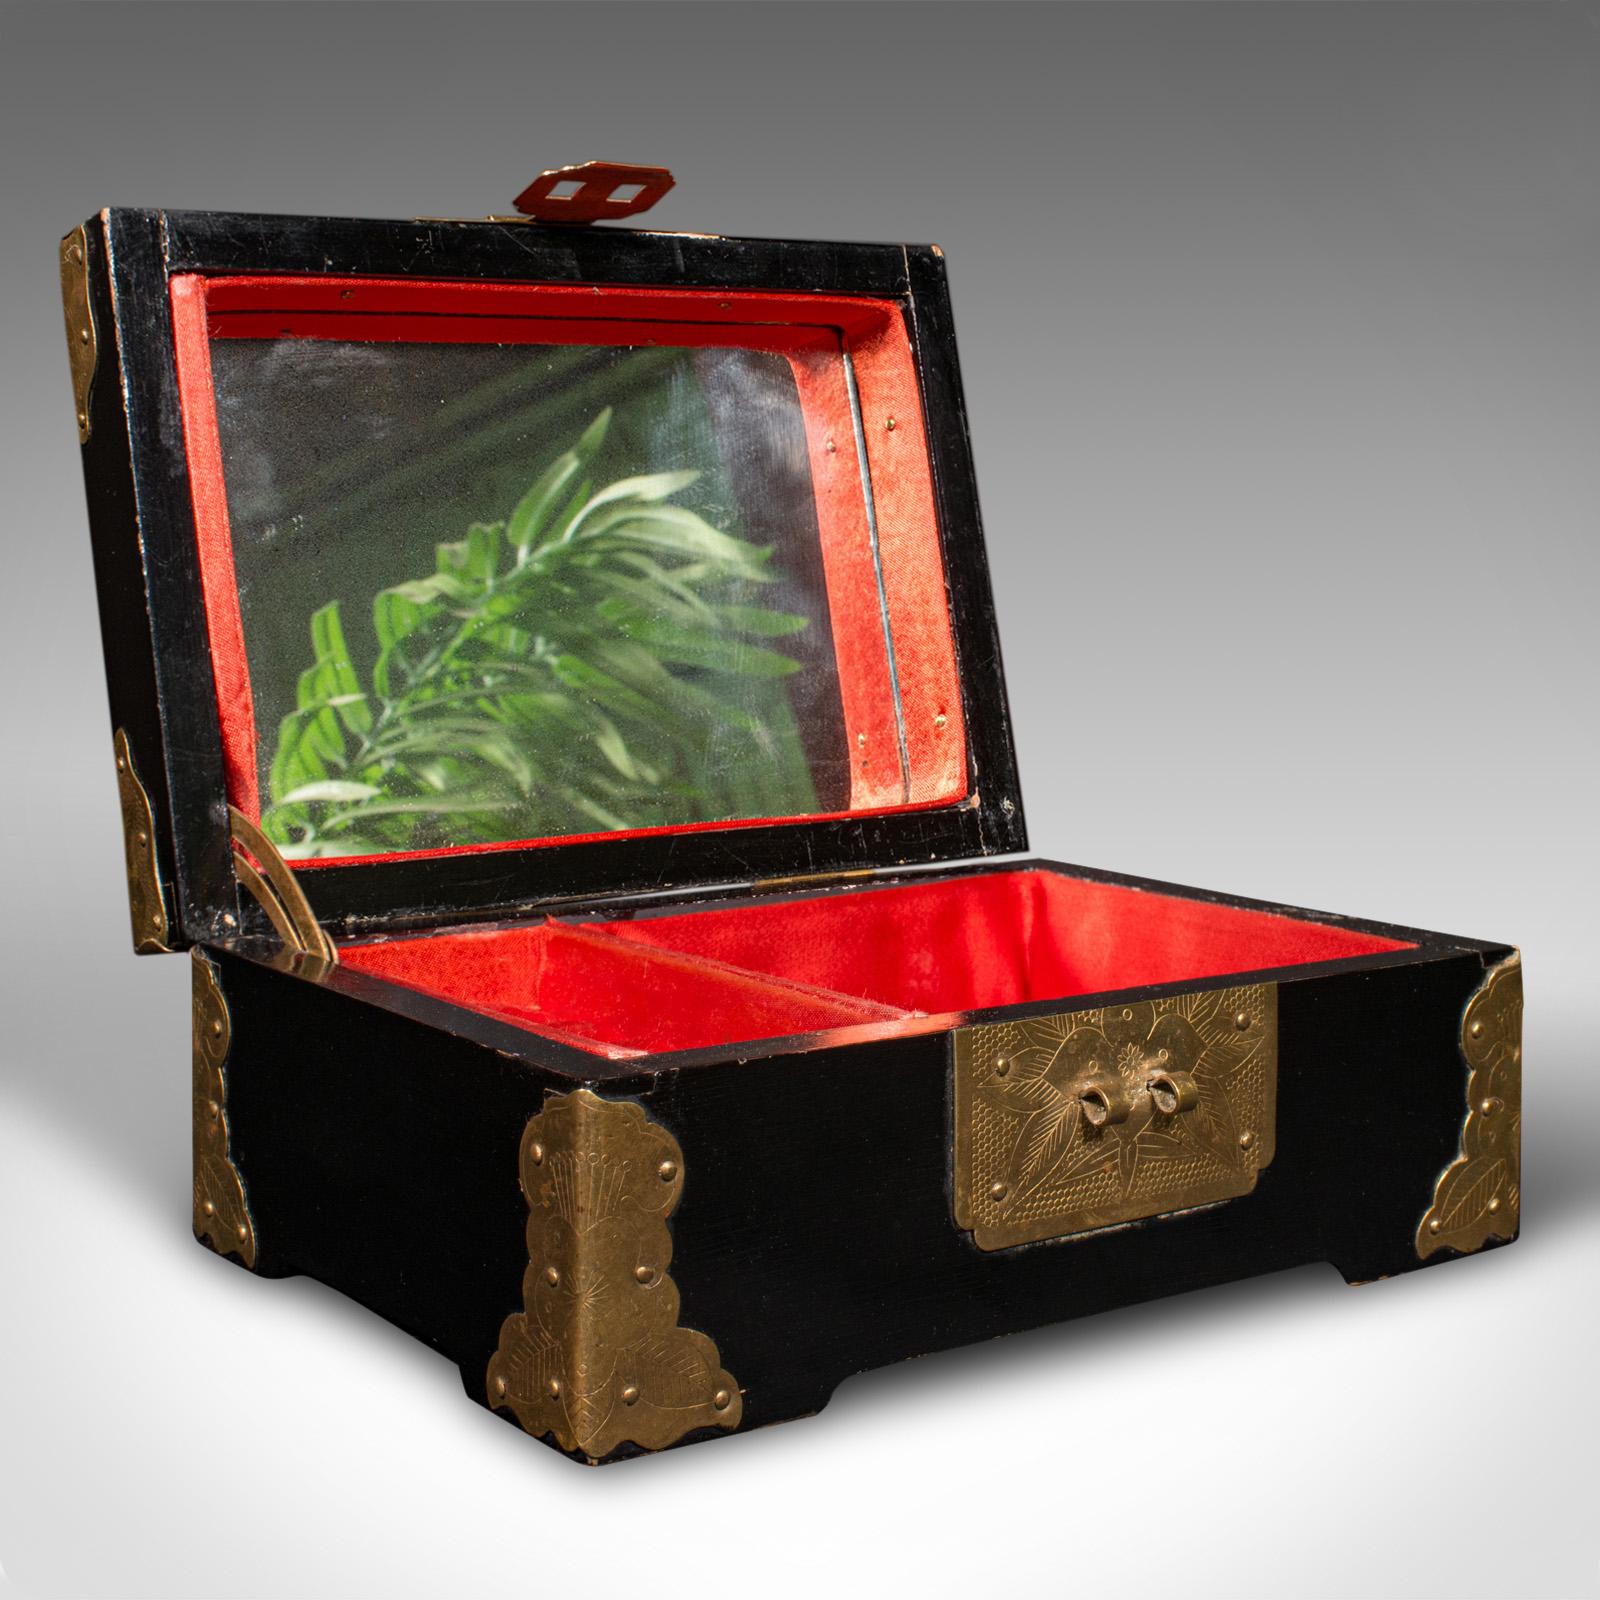 This is a small vintage decorative jewellery box. A Chinese, lacquer and soapstone keepsake case with mirror, dating to the Art Deco period, circa 1940.

Fascinatingly presented box with deep lacquered finish and brightwork
Displays a desirable aged